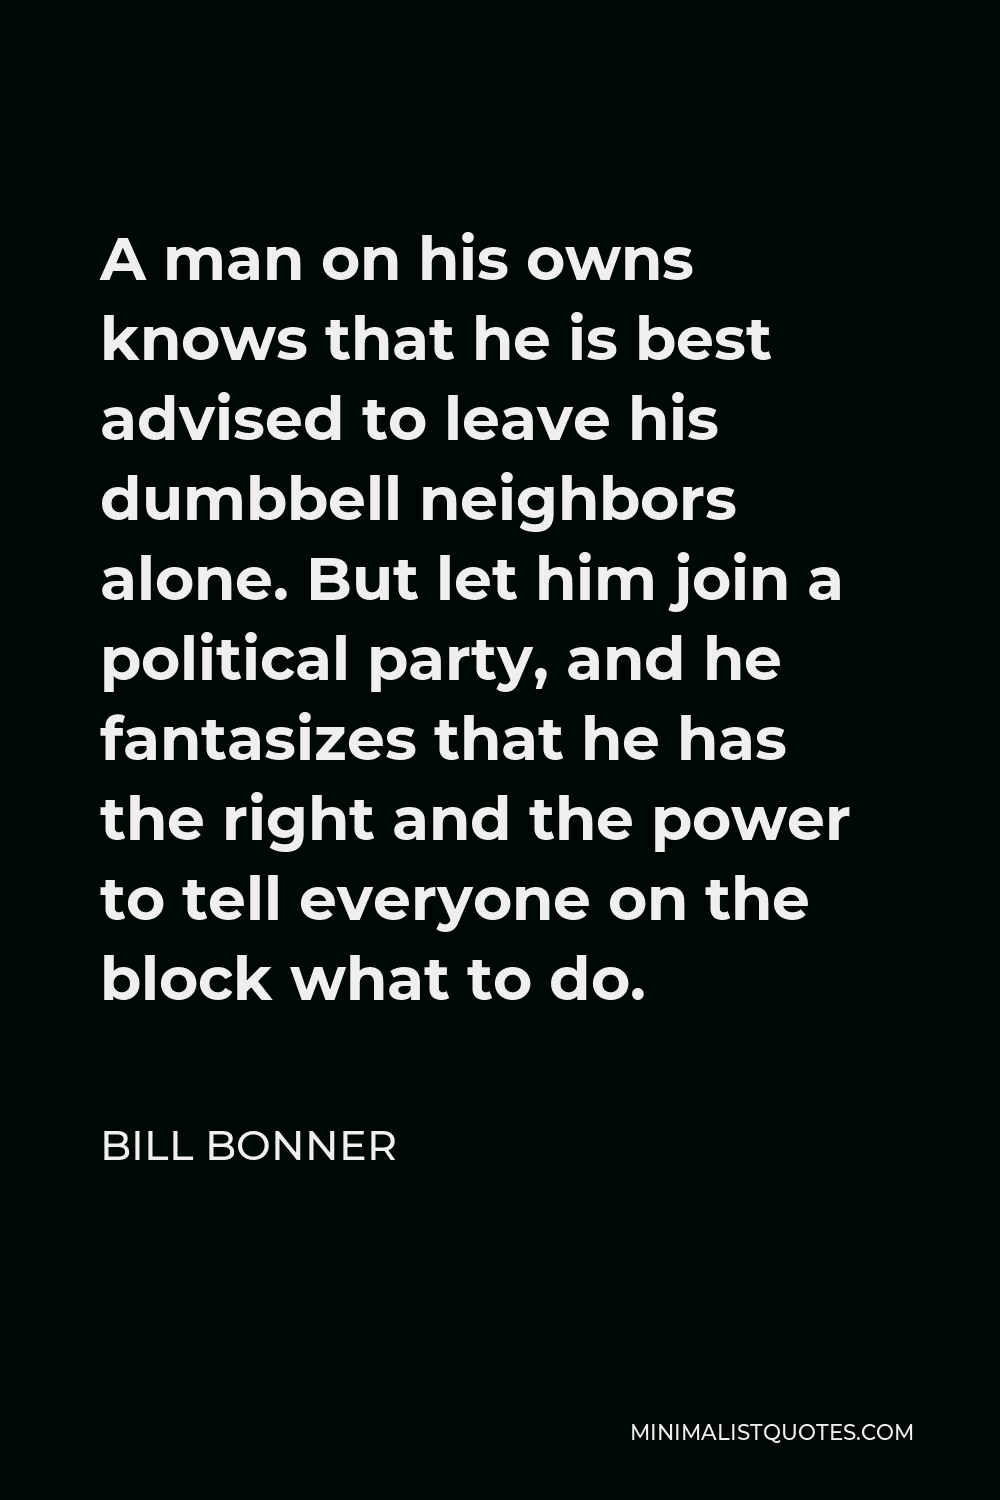 Bill Bonner Quote - A man on his owns knows that he is best advised to leave his dumbbell neighbors alone. But let him join a political party, and he fantasizes that he has the right and the power to tell everyone on the block what to do.